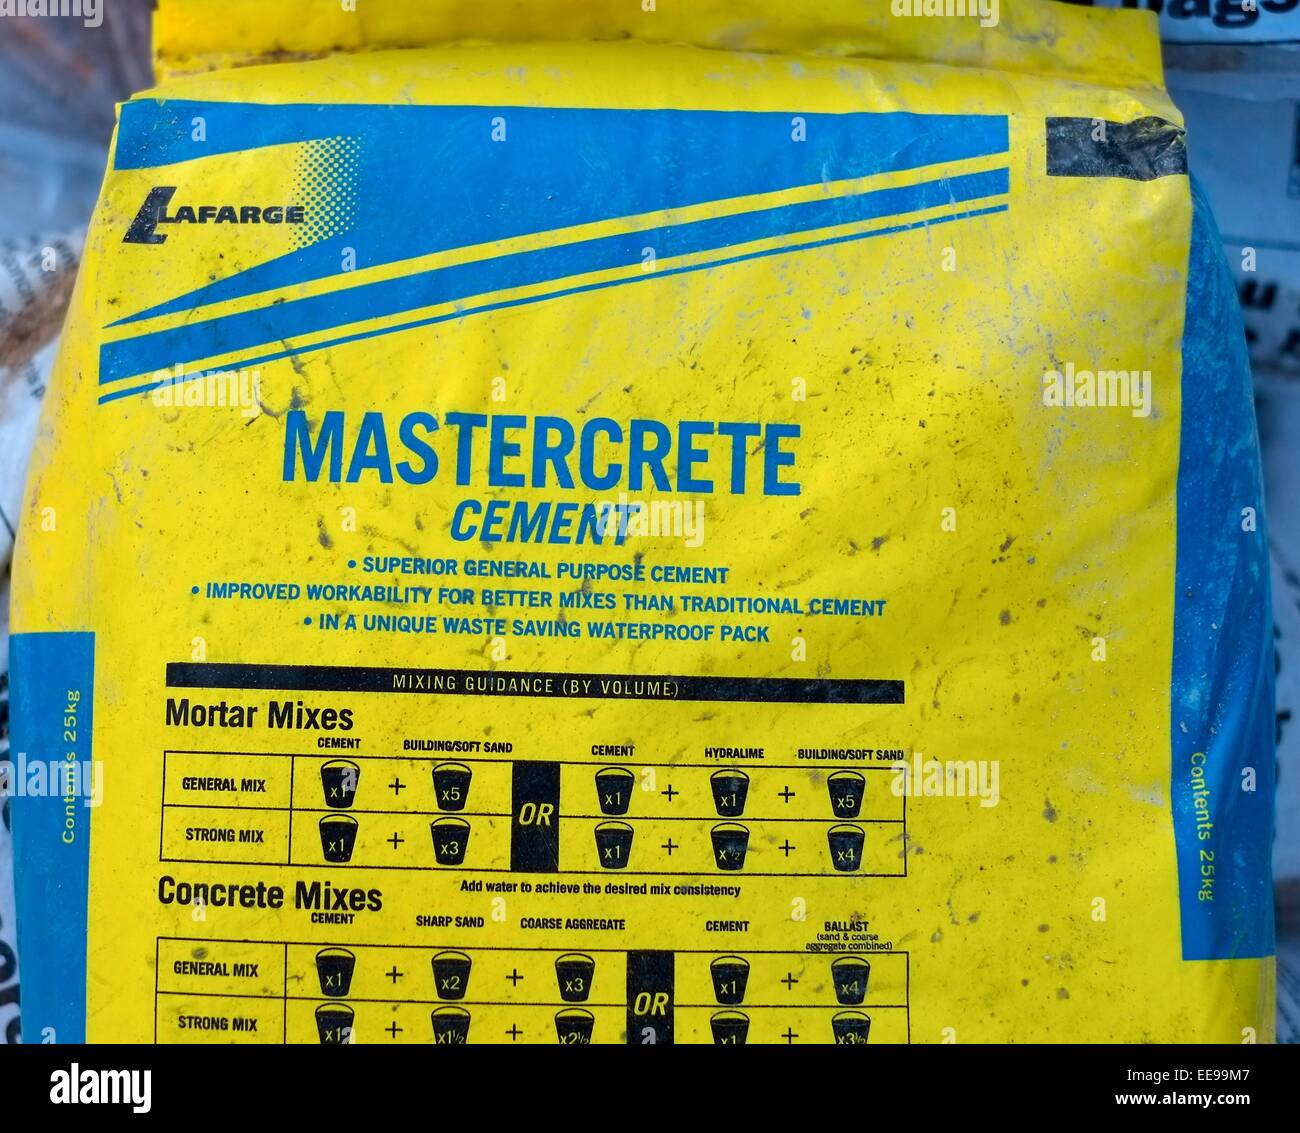 A bag of Mastercrete cement Stock Photo, Royalty Free Image: 77651847